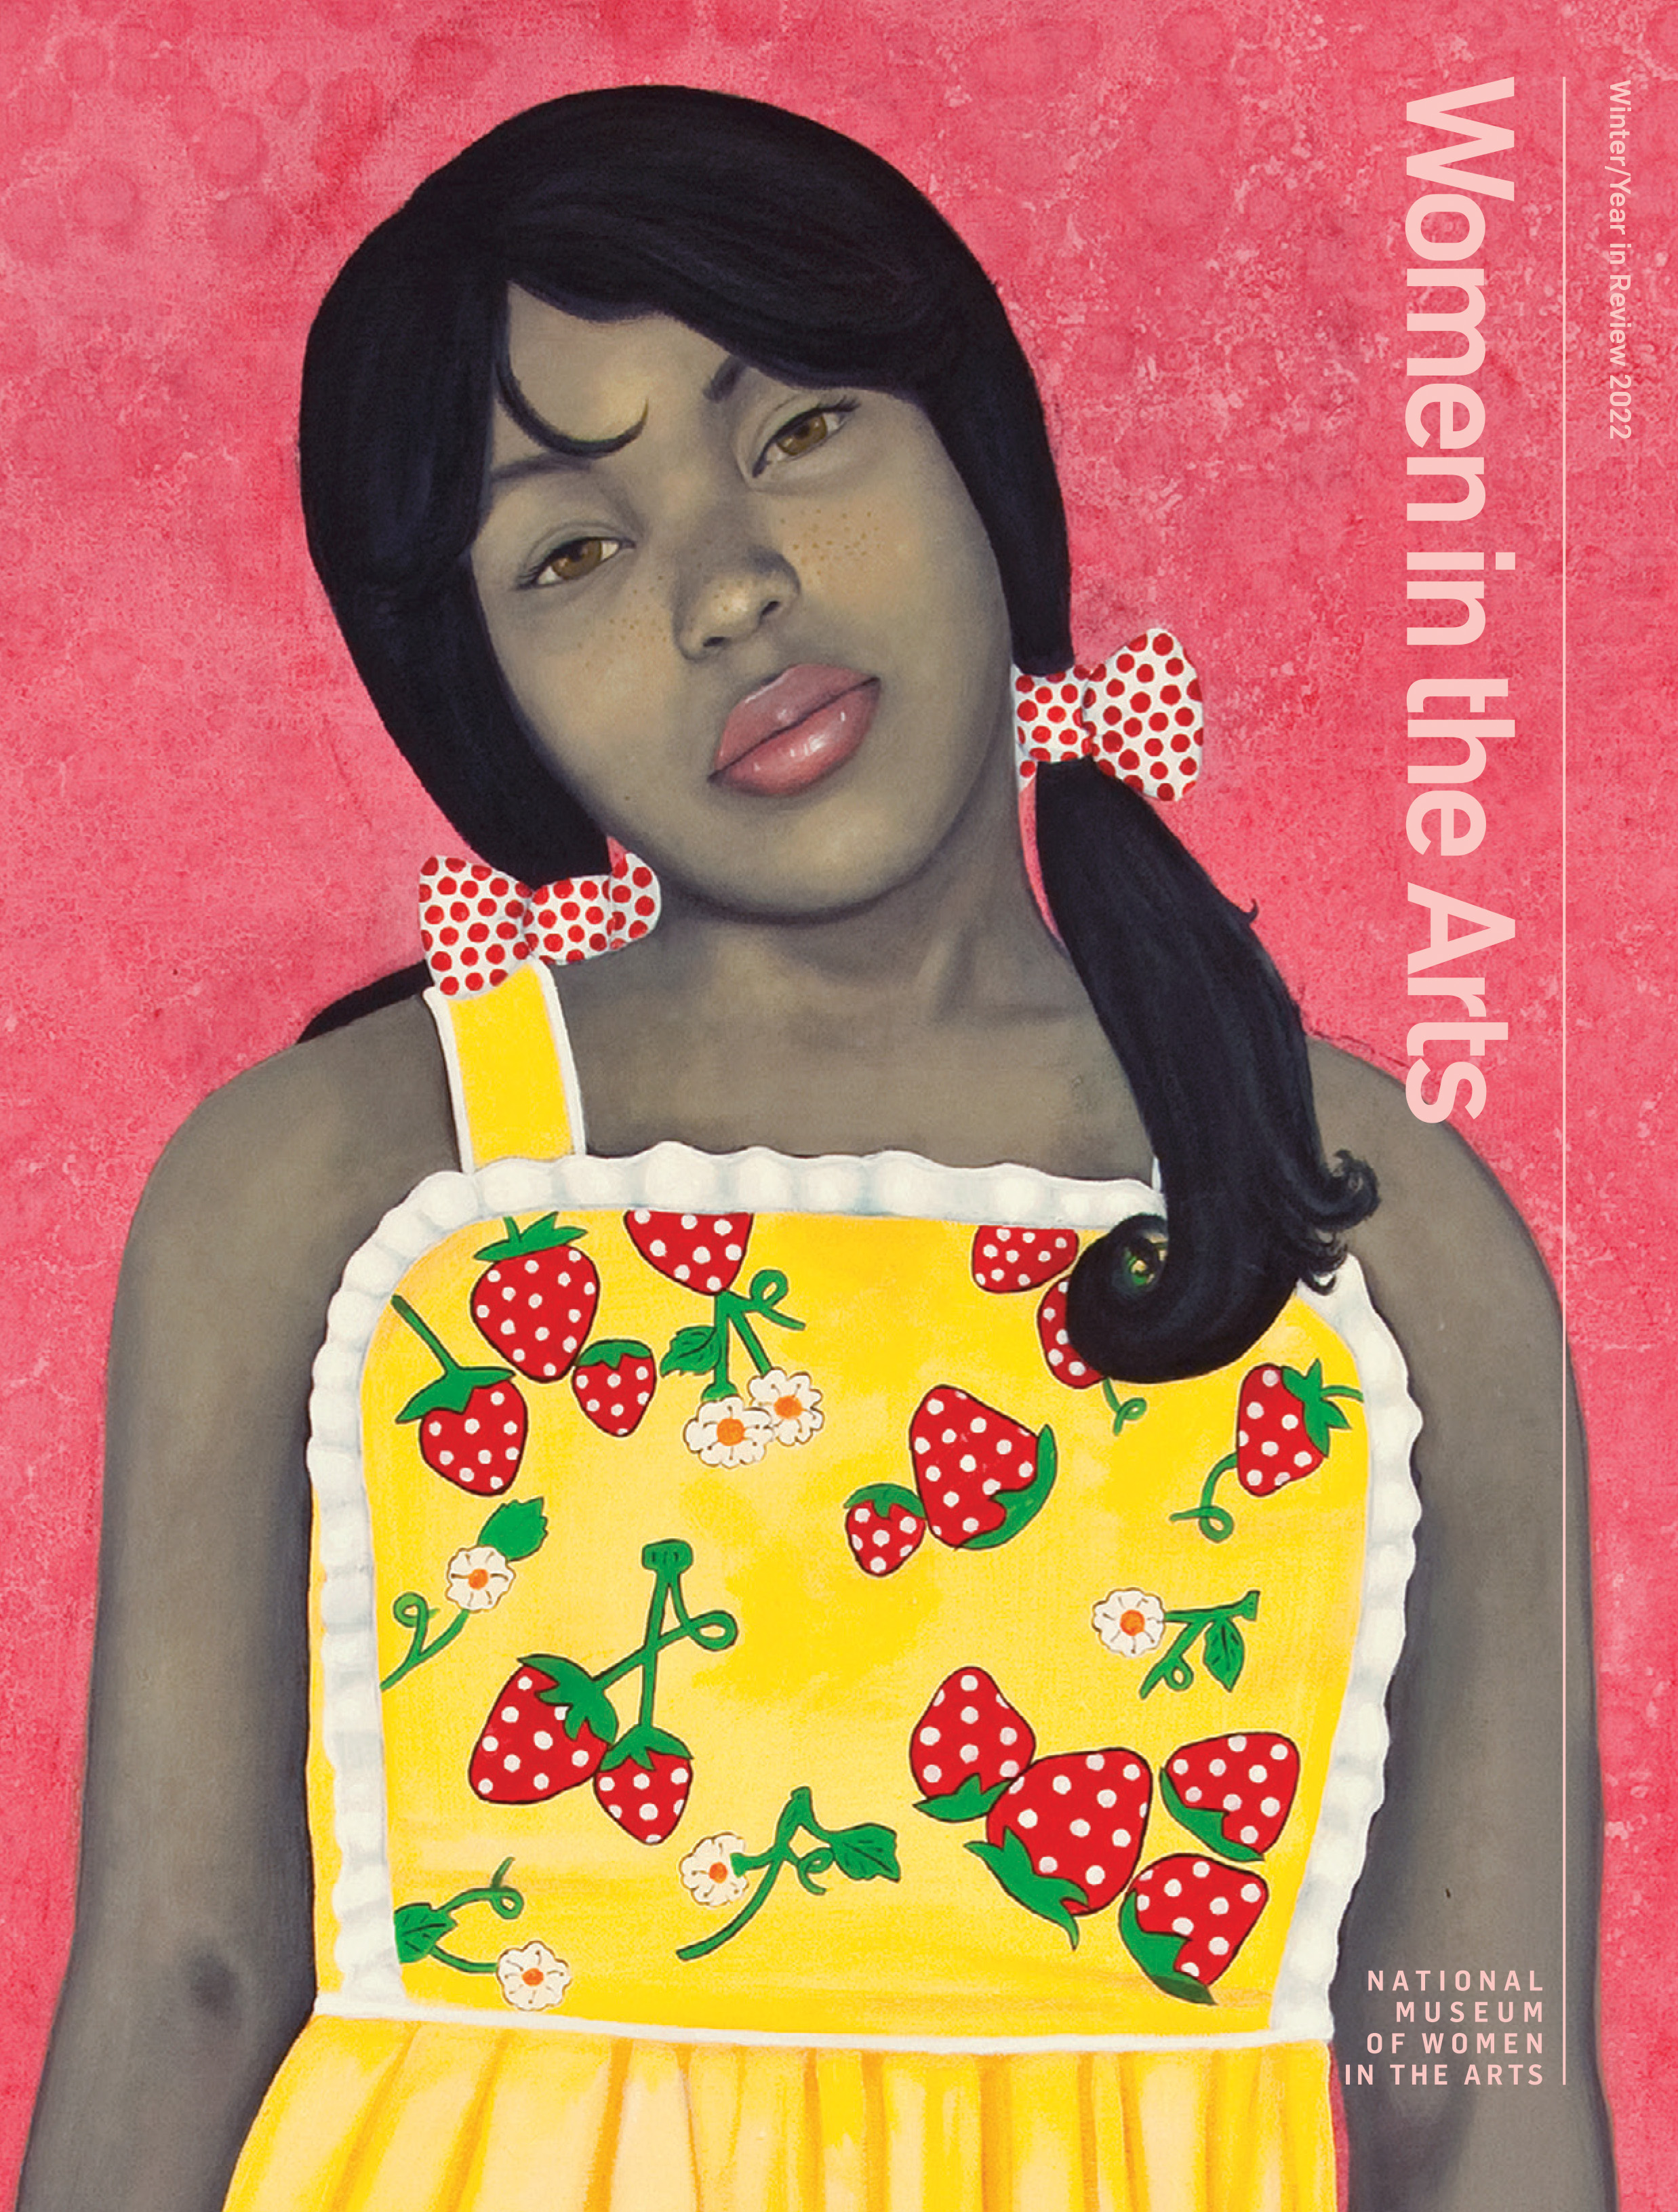 Magazine cover features a painting by Amy Sherald of a an expressionless young woman with medium-dark skin tone rendered in grayscale.